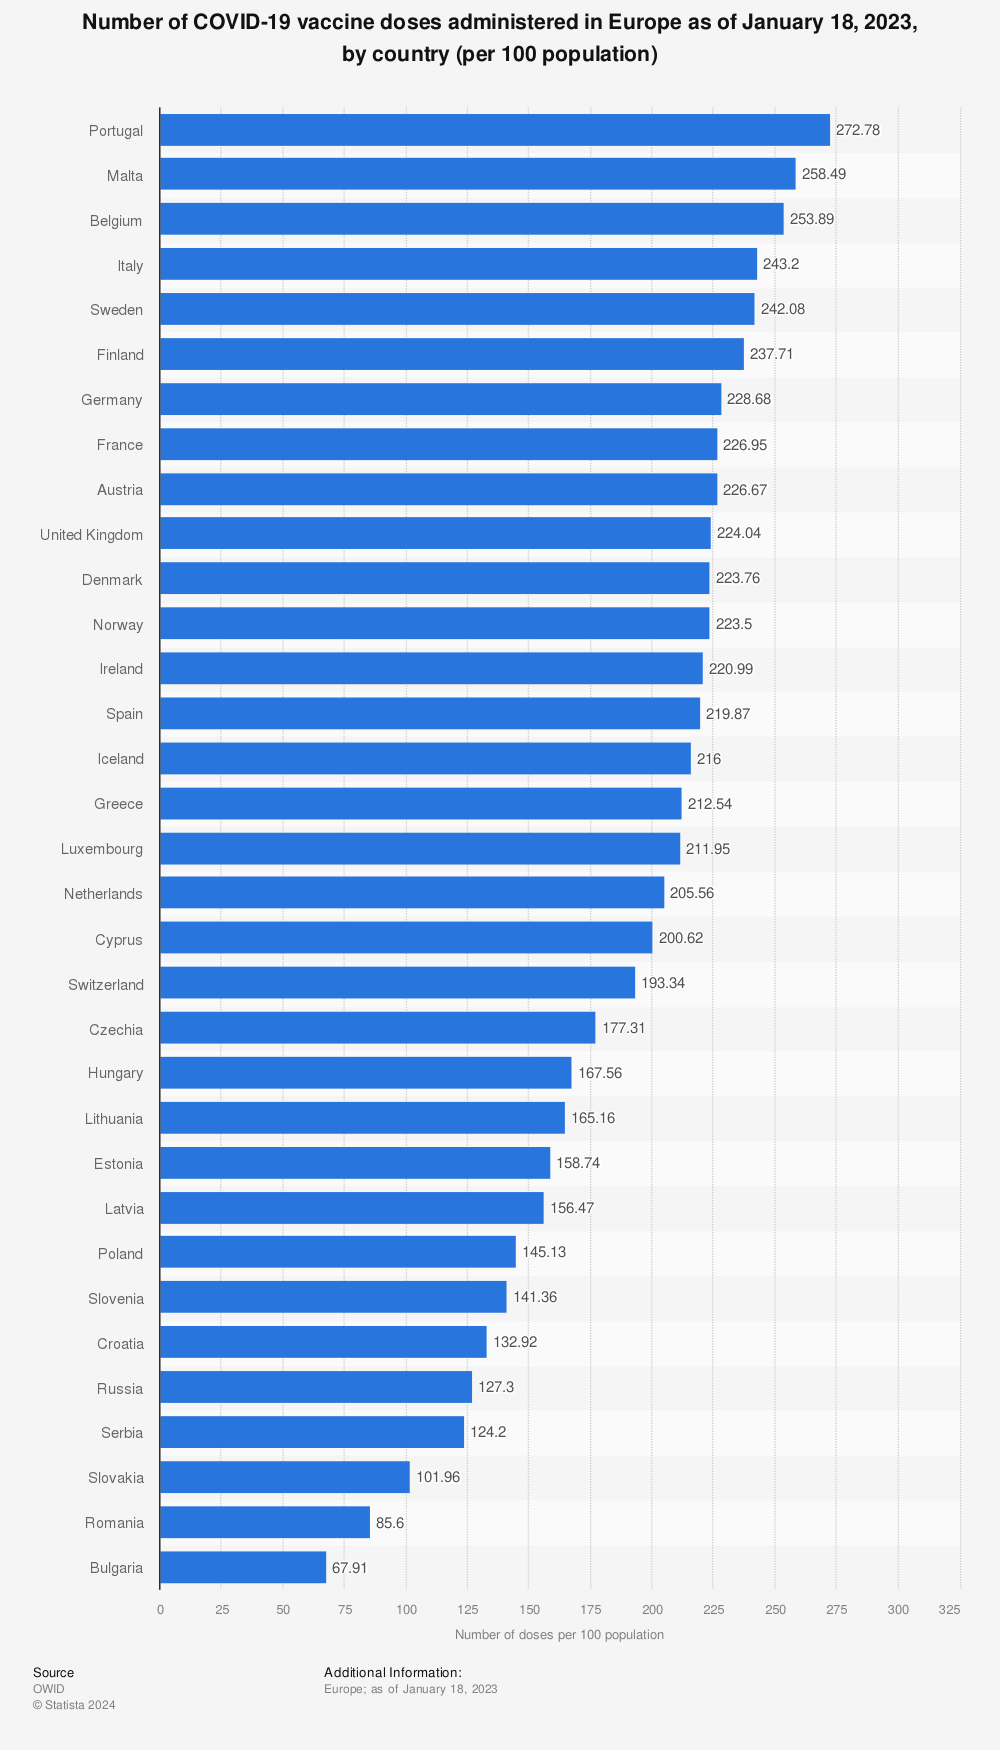 Statistic: Number of COVID-19 vaccine doses administered in Europe as of January 18, 2023, by country (per 100 population) | Statista